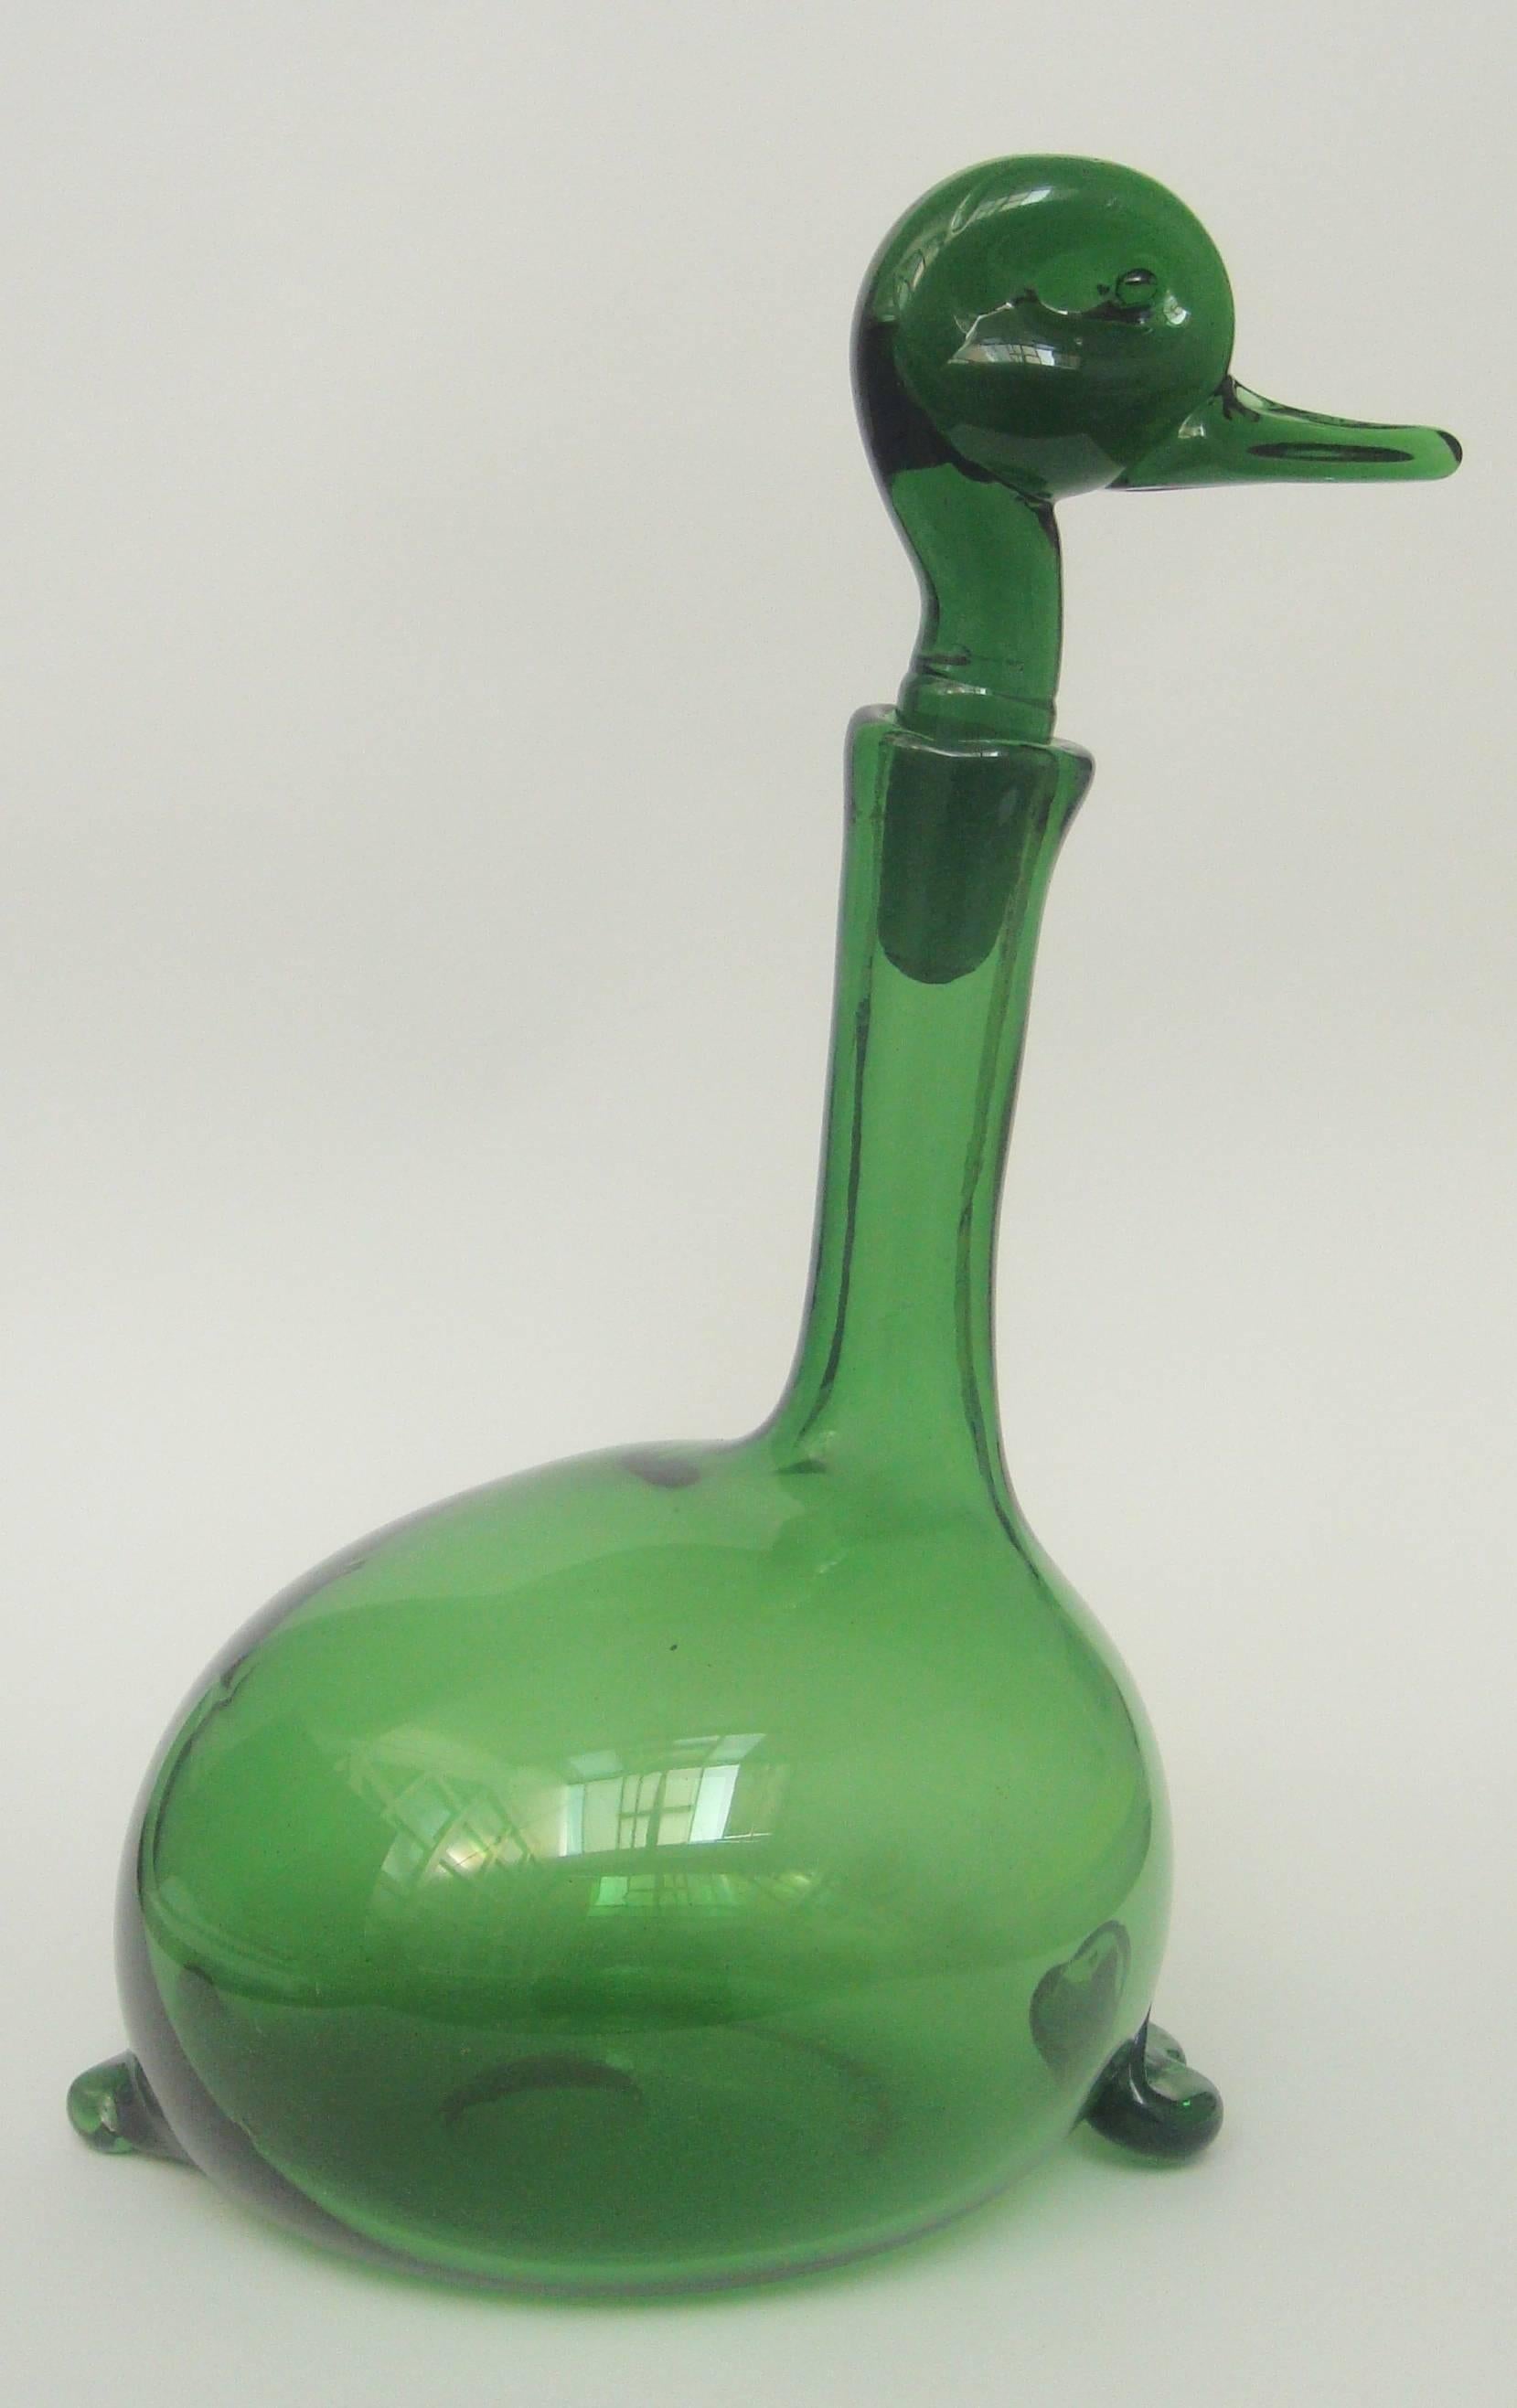 A handblown Empoli Verde decanter,
in the shape of a duck thought to be,
designed by Gio Ponti for Toso Bagnoli.
   